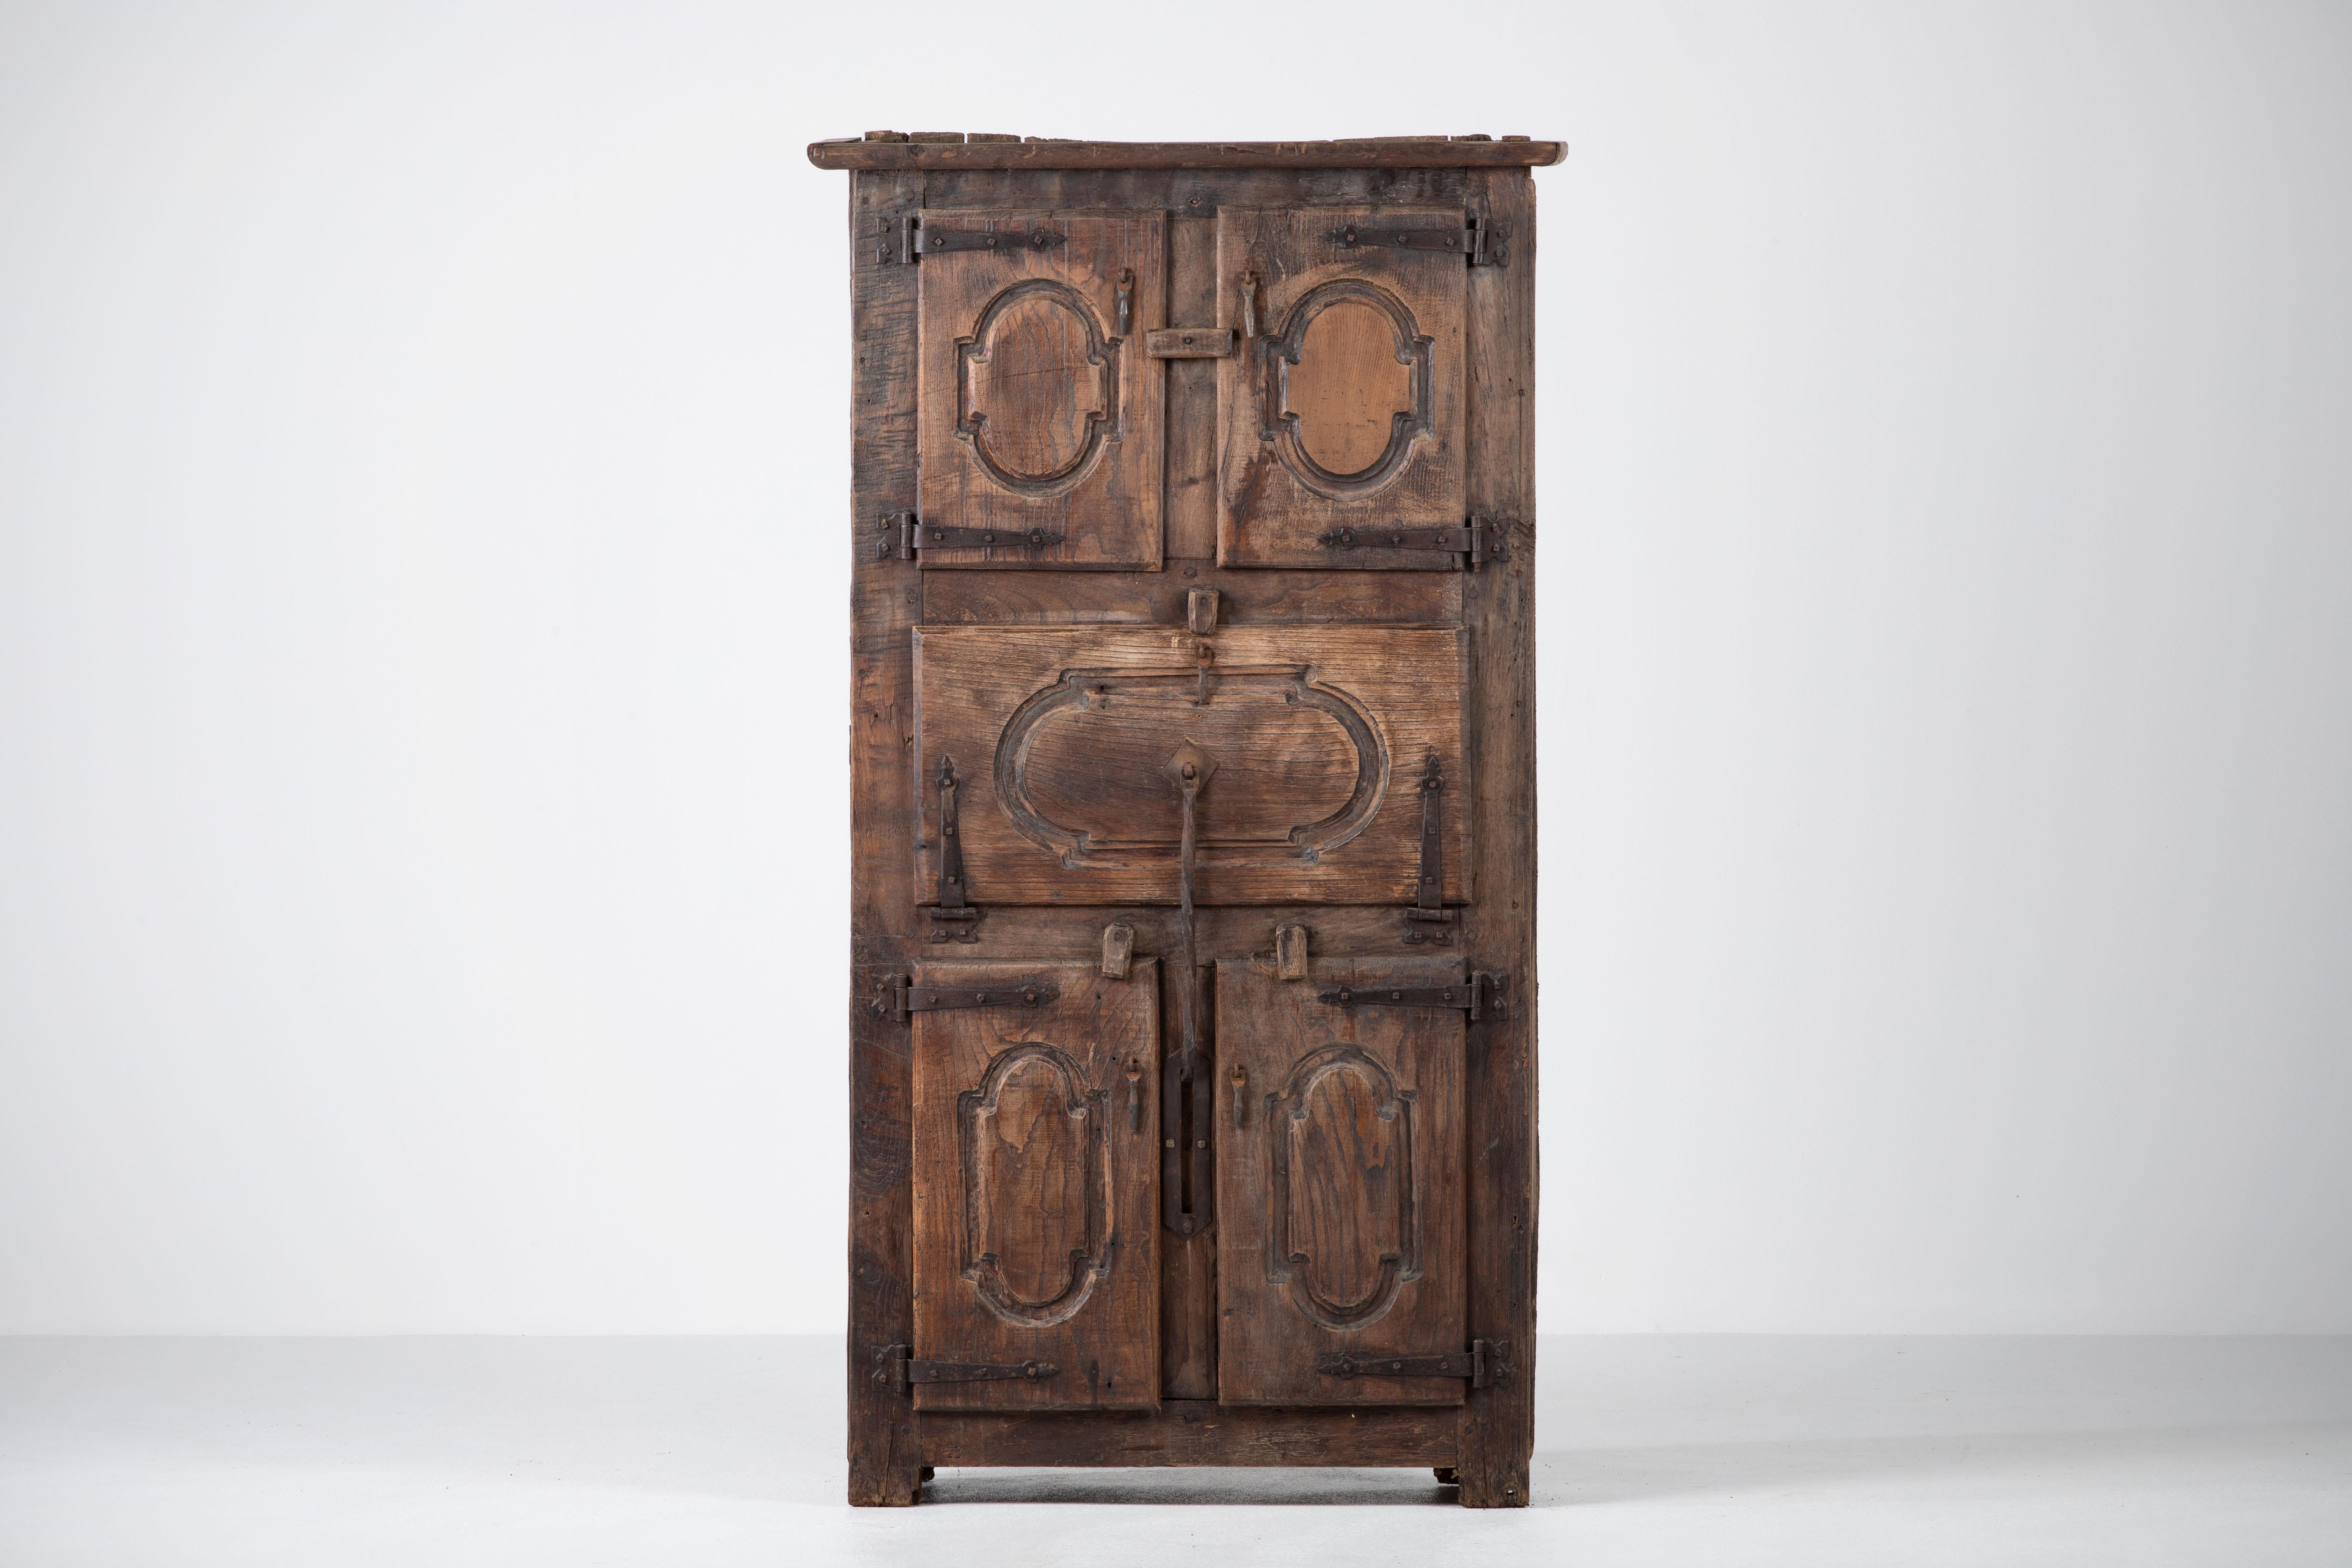 Rustic Armoire in solid oak, France 18th century.
This old cabinet was unearthed in a farm in the Pyrenees, it is an authentic piece of rustic furniture. Handcrafted in the 1700s, made from raw wooden planks.
Nice brutalist object, wabi-sabi